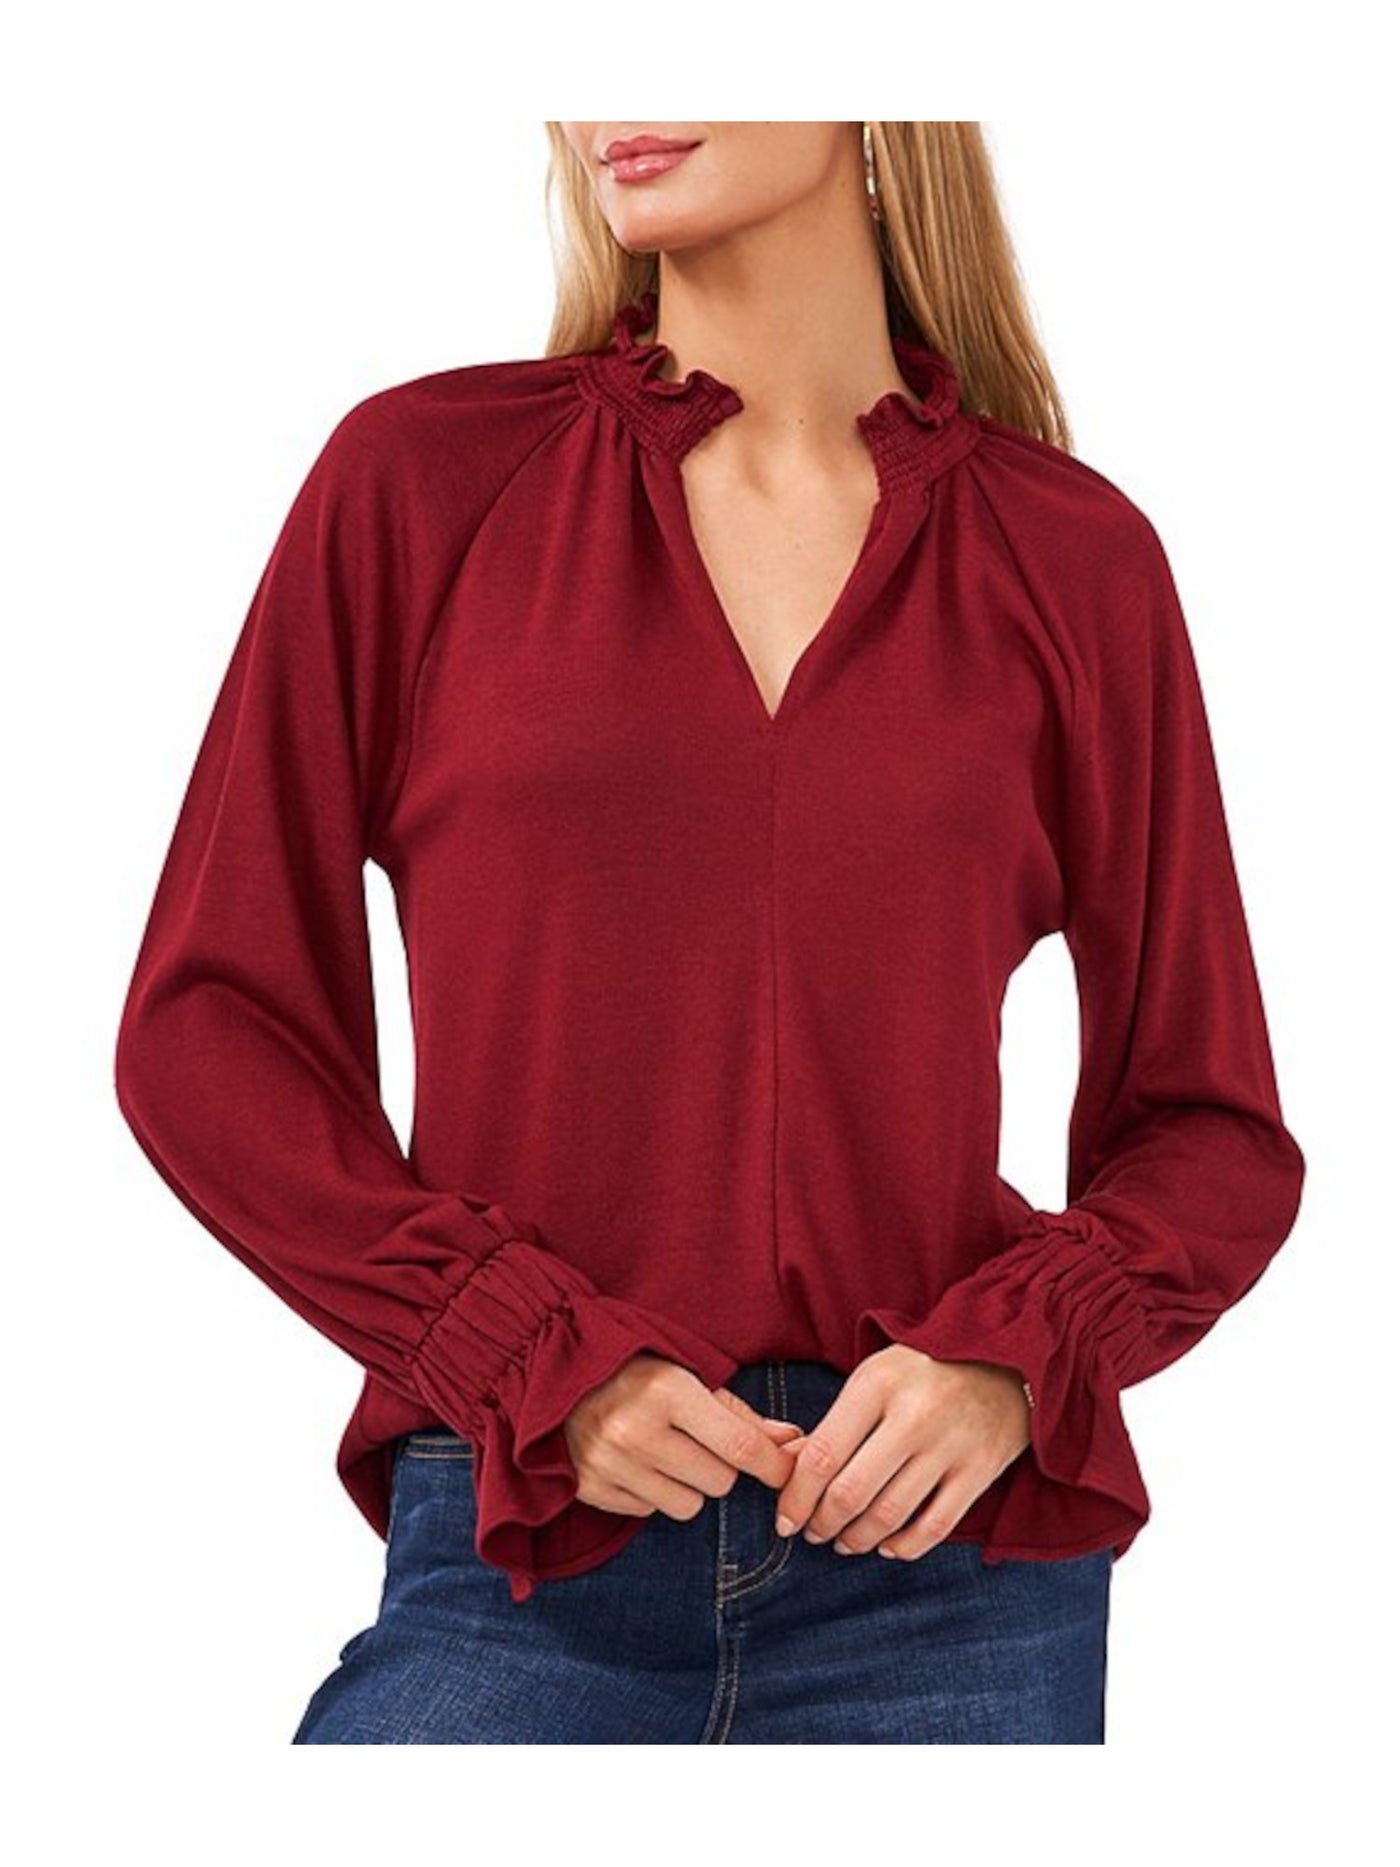 VINCE CAMUTO Womens Burgundy Smocked Bell Cuffs Long Sleeve Split Sweater L